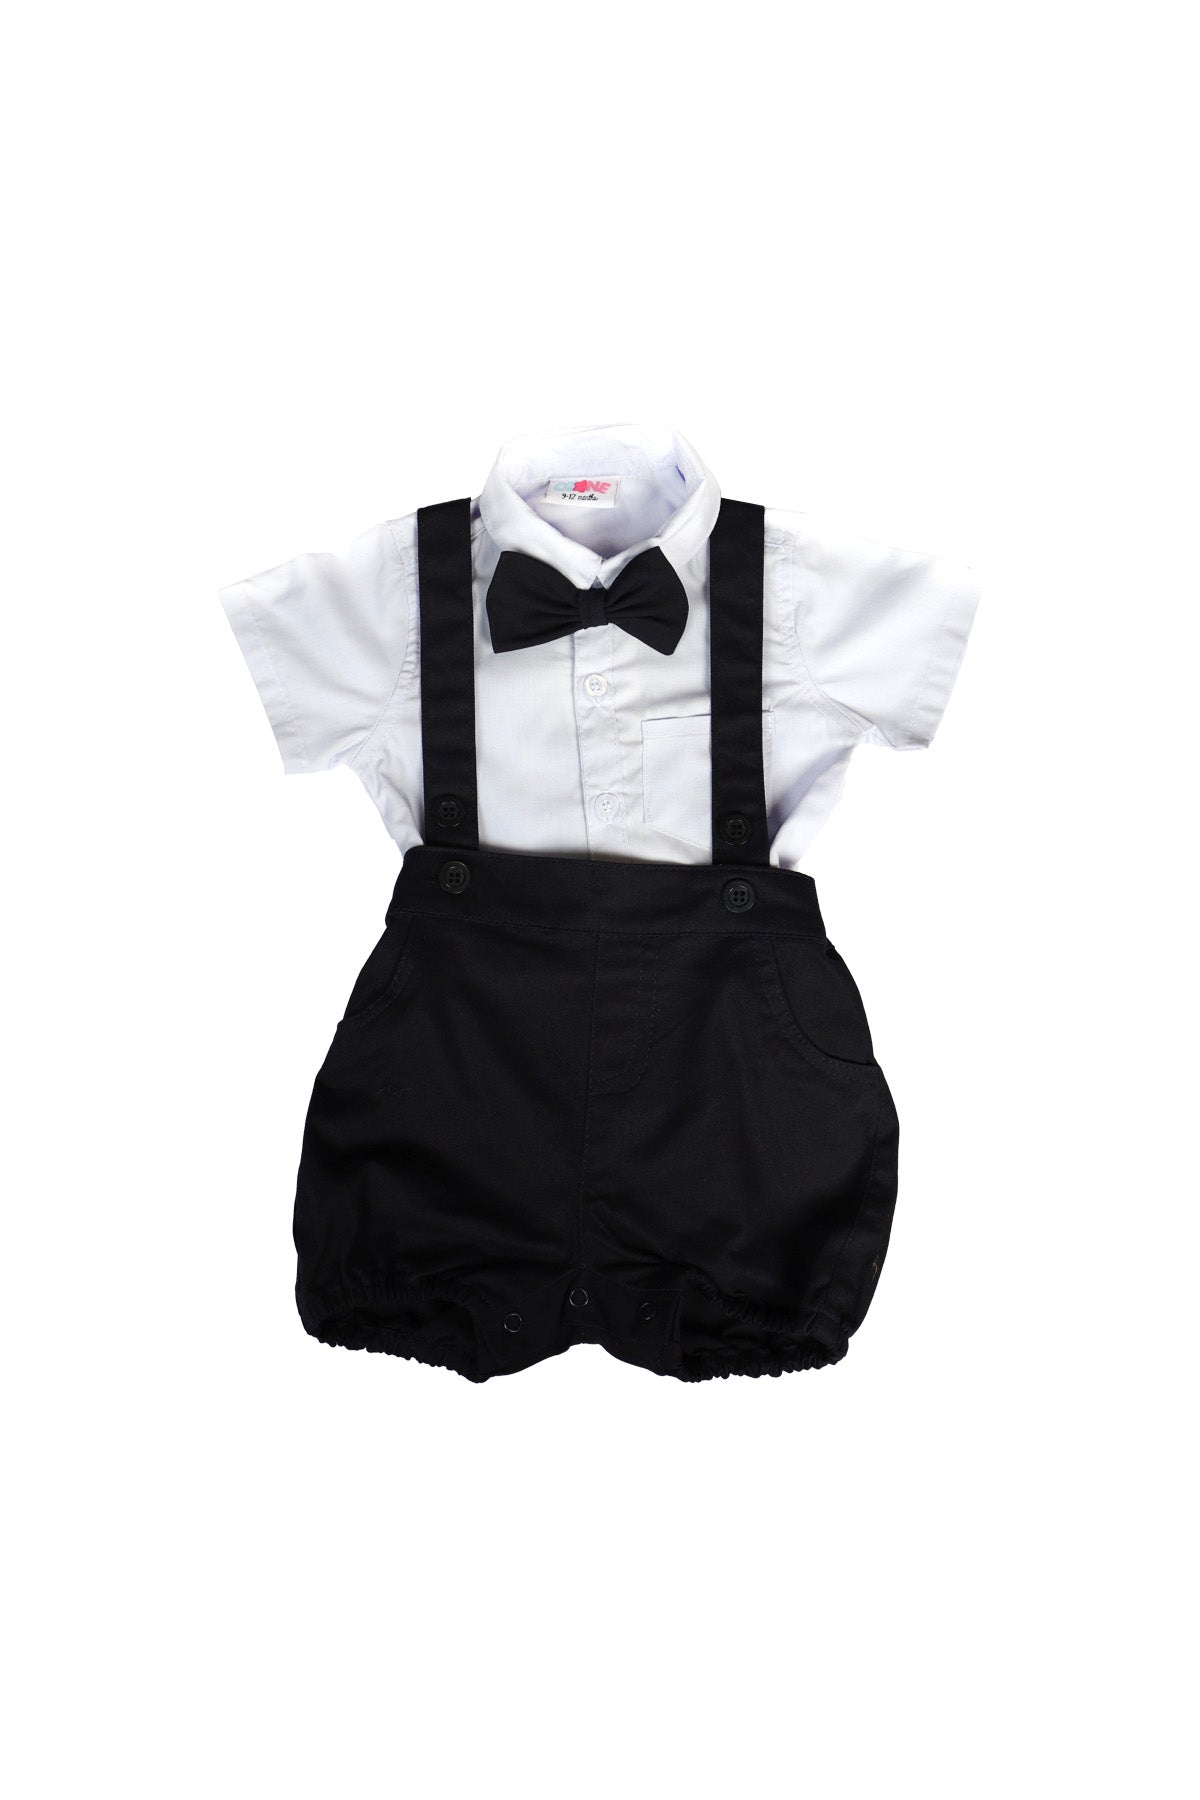 Ozone Baby Boys Party Wear Suit